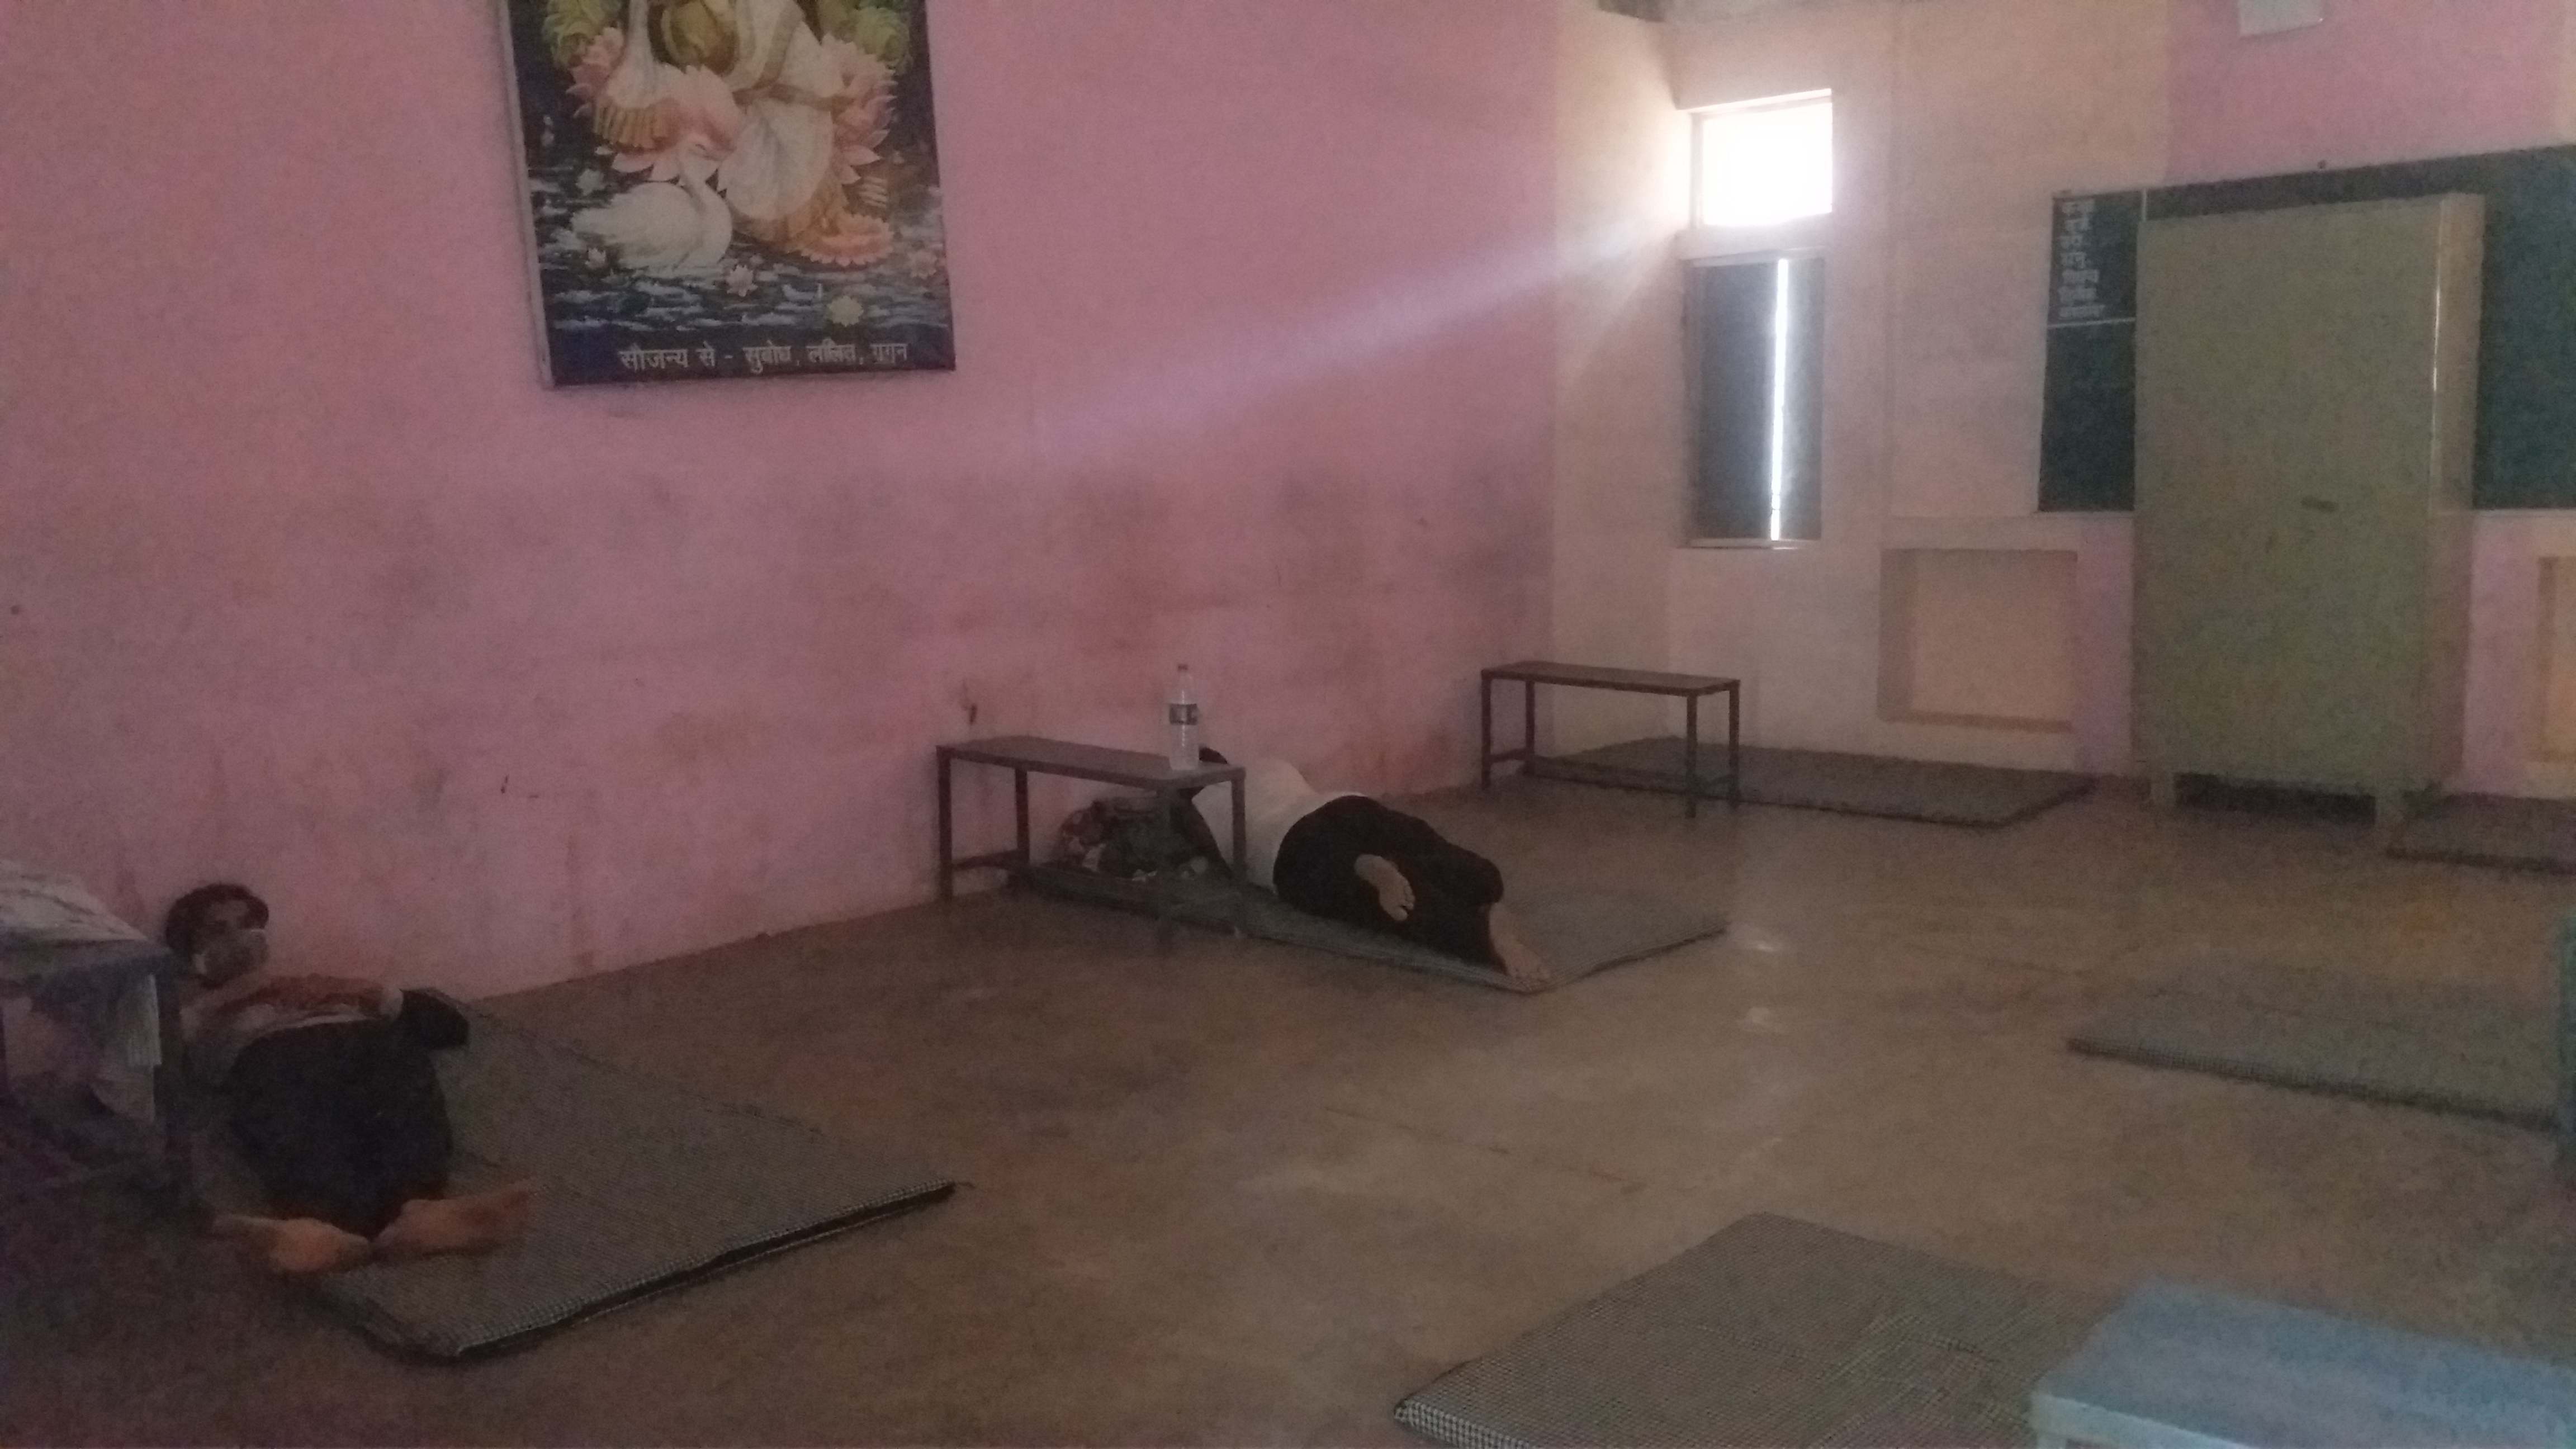 isolation center started for corona warriors in chhindwara